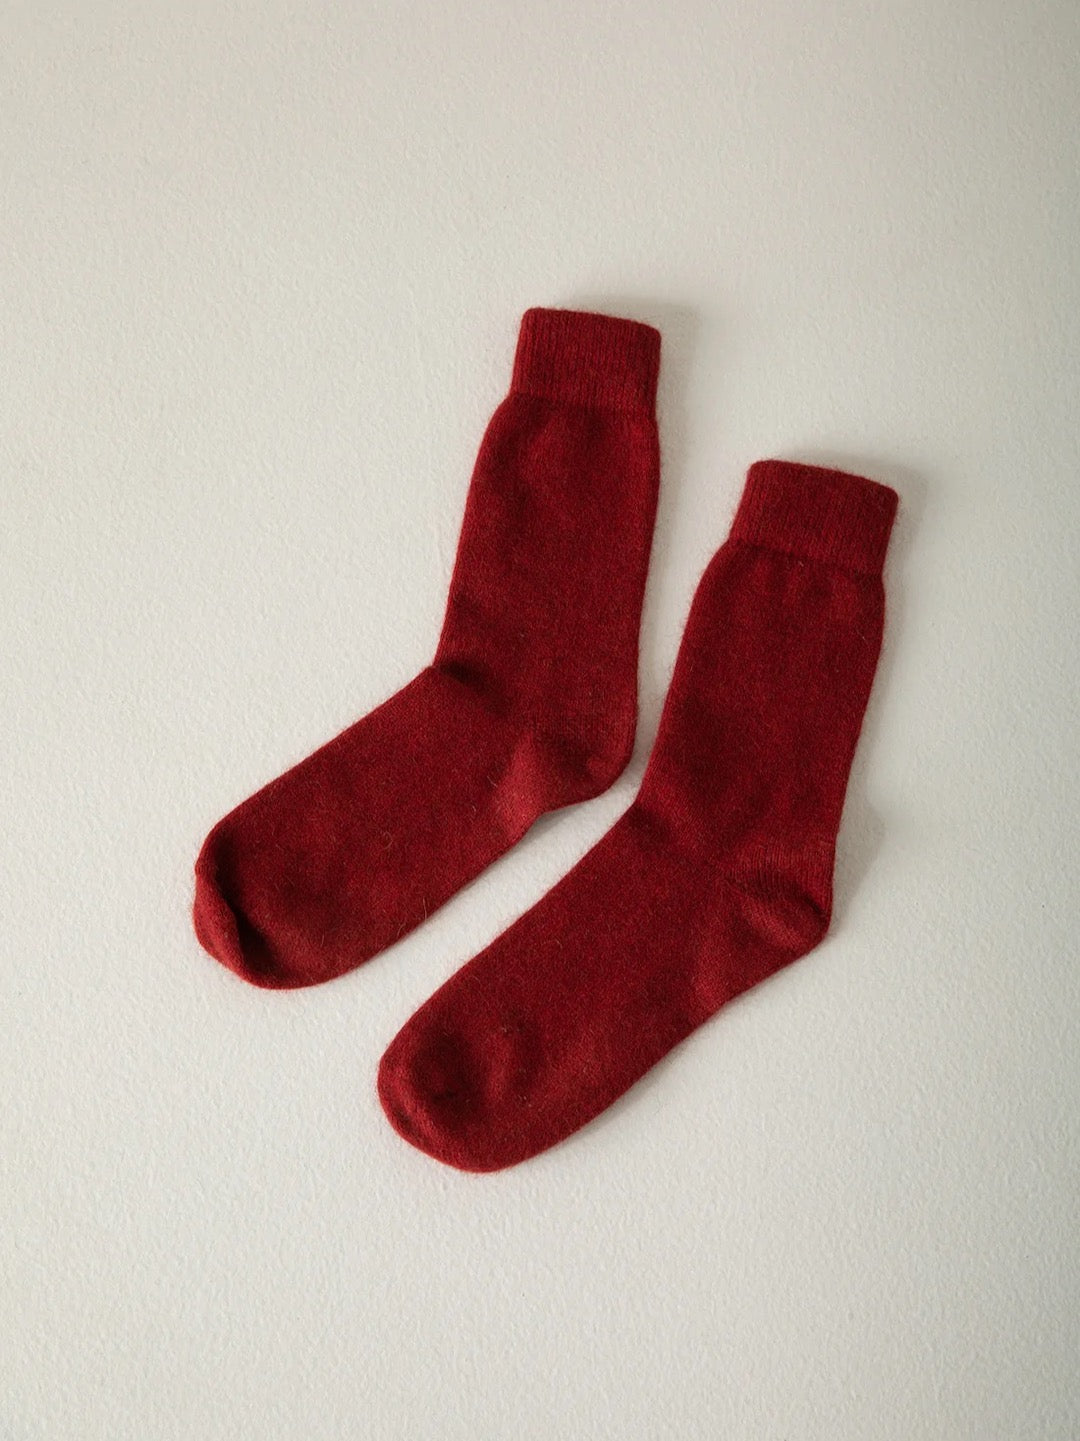 A pair of Francie Possum Merino Socks – Crimson, suitable for various shoe sizes, laid flat on a light beige background.